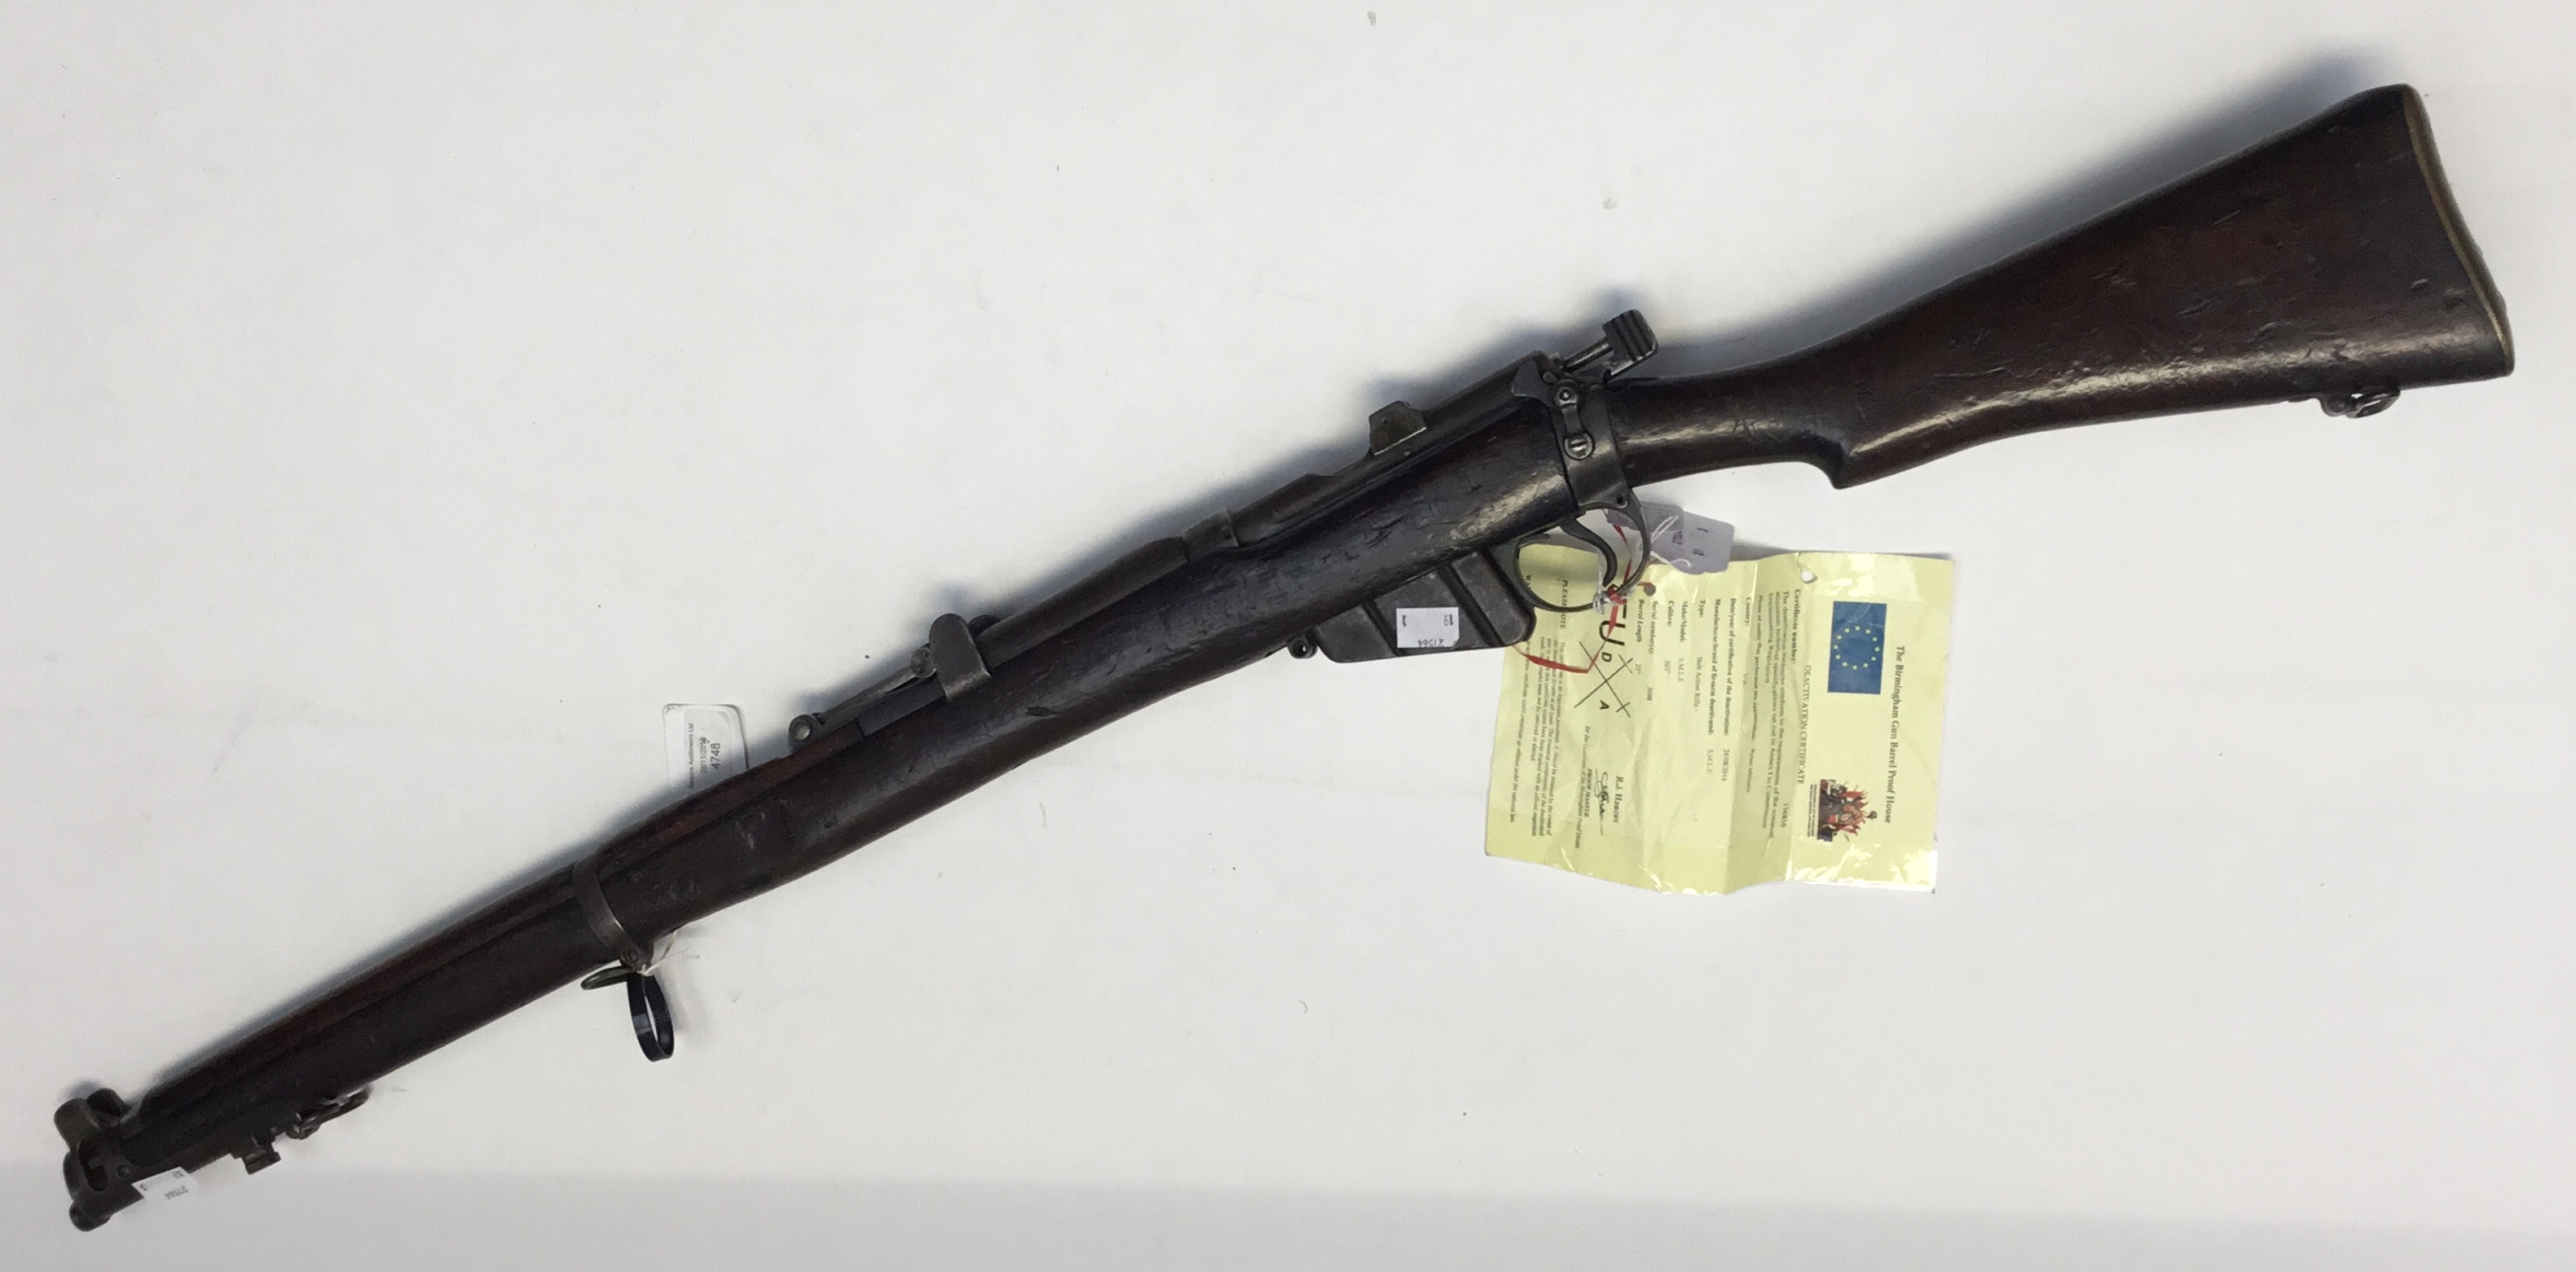 Deactivated* 1916 Short Magazine Lee Enfield Service Rifle. Good example with some wear and marks - Bild 5 aus 5